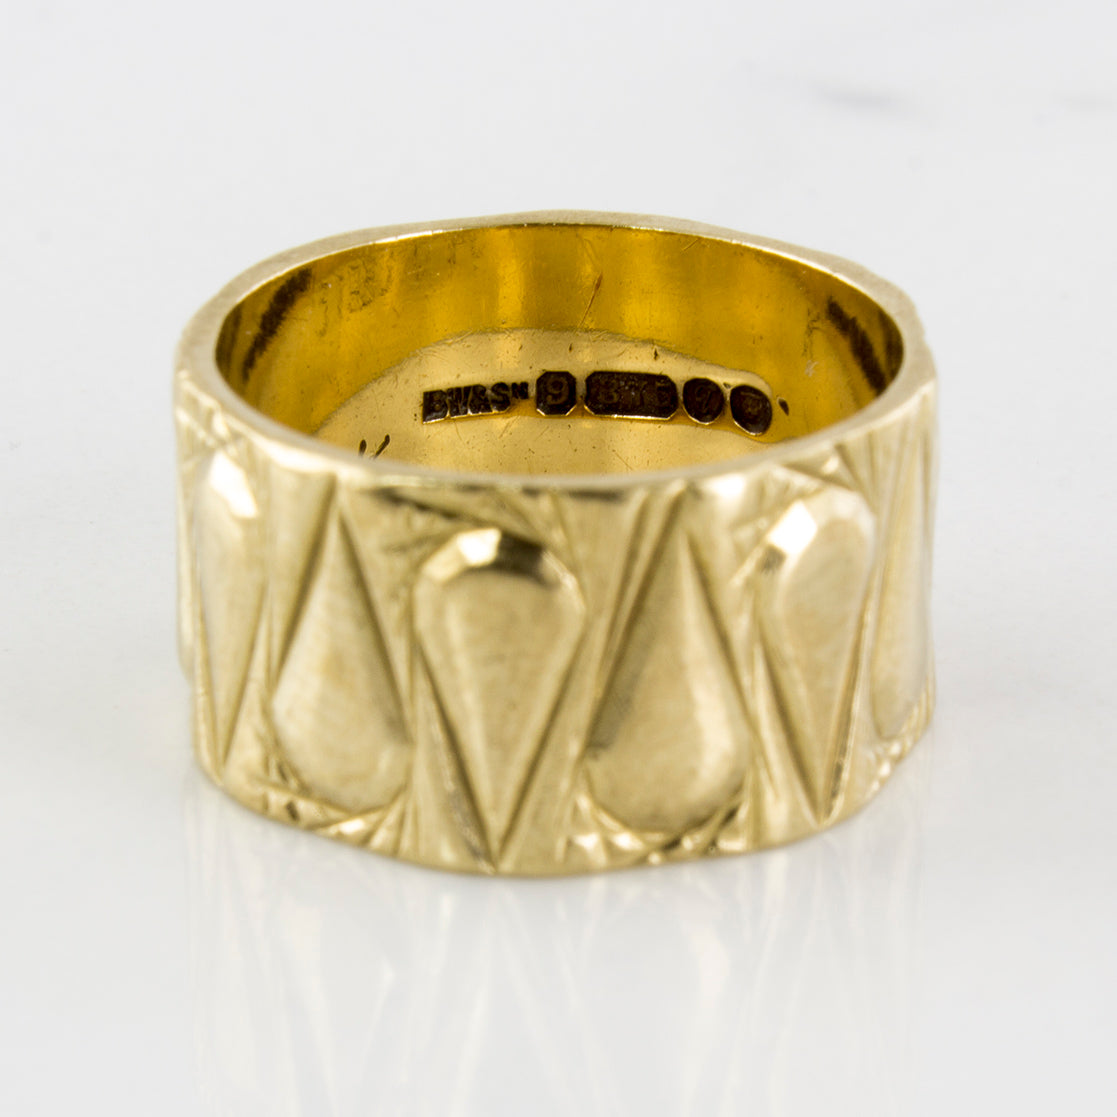 Brody Williams' Patterned Vintage Gold Ring | SZ 5 |